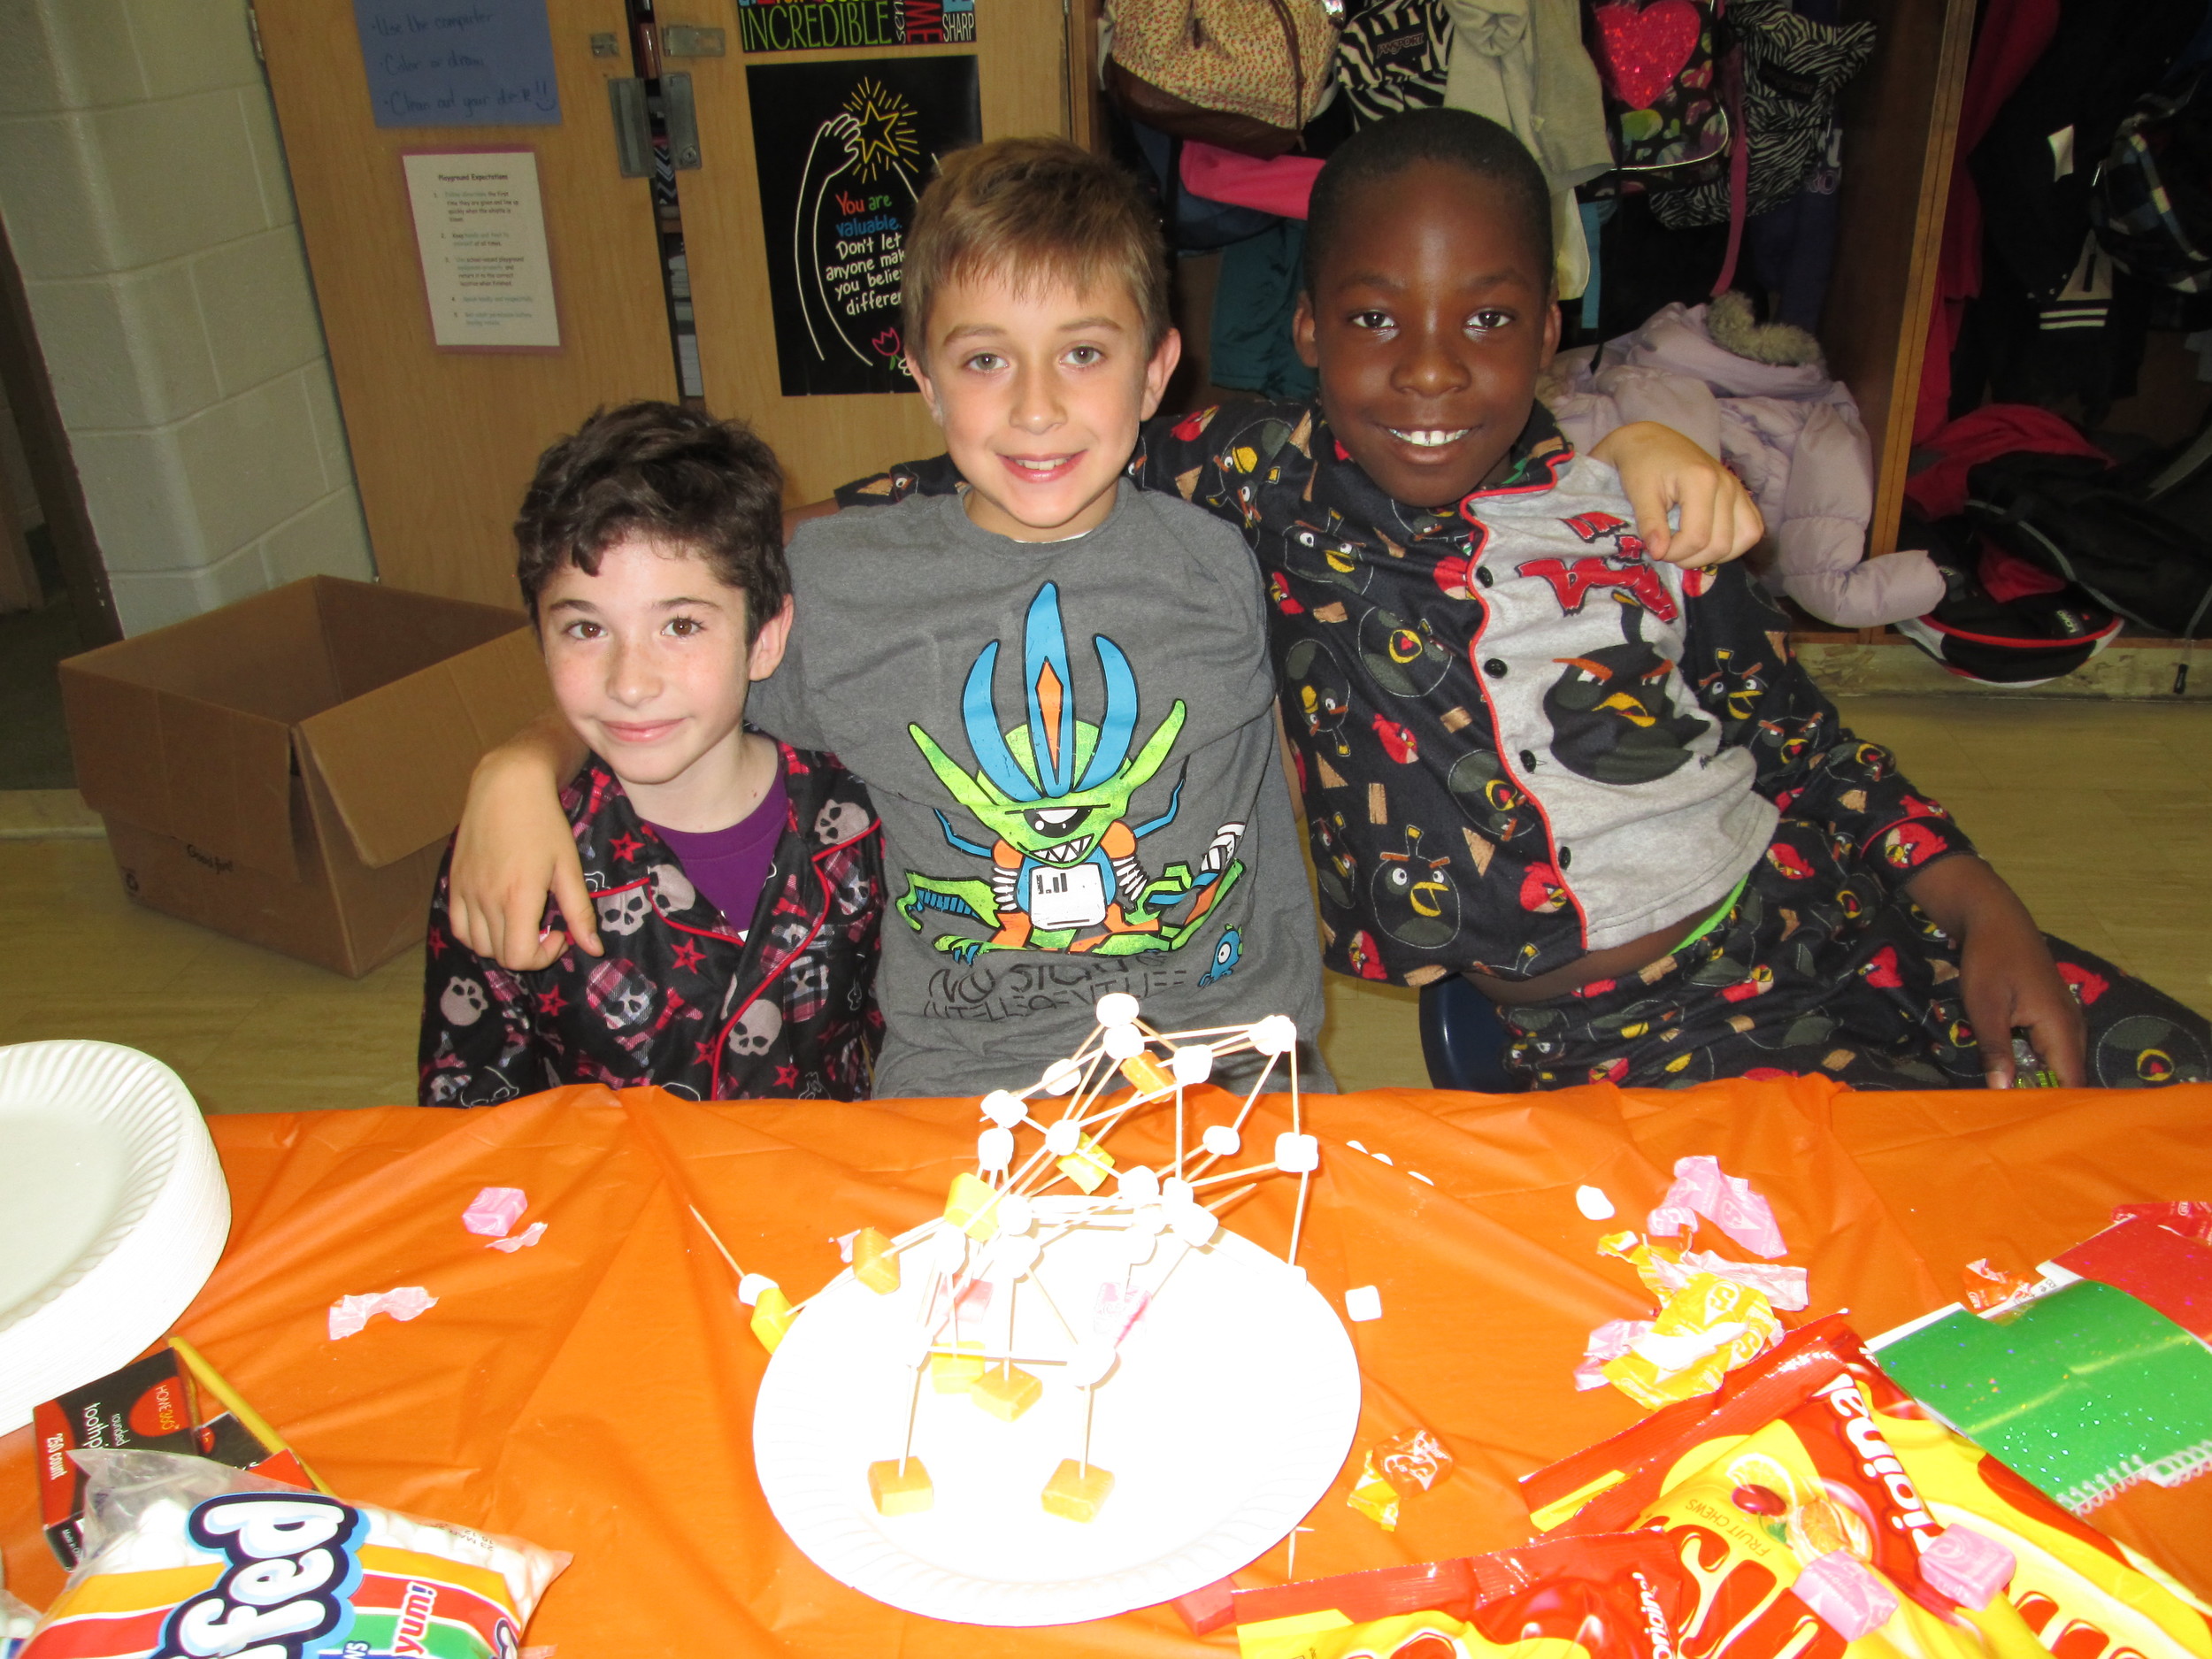 g4g Day@New York 2014 – Launch with "Trick-or-treat for Science"!